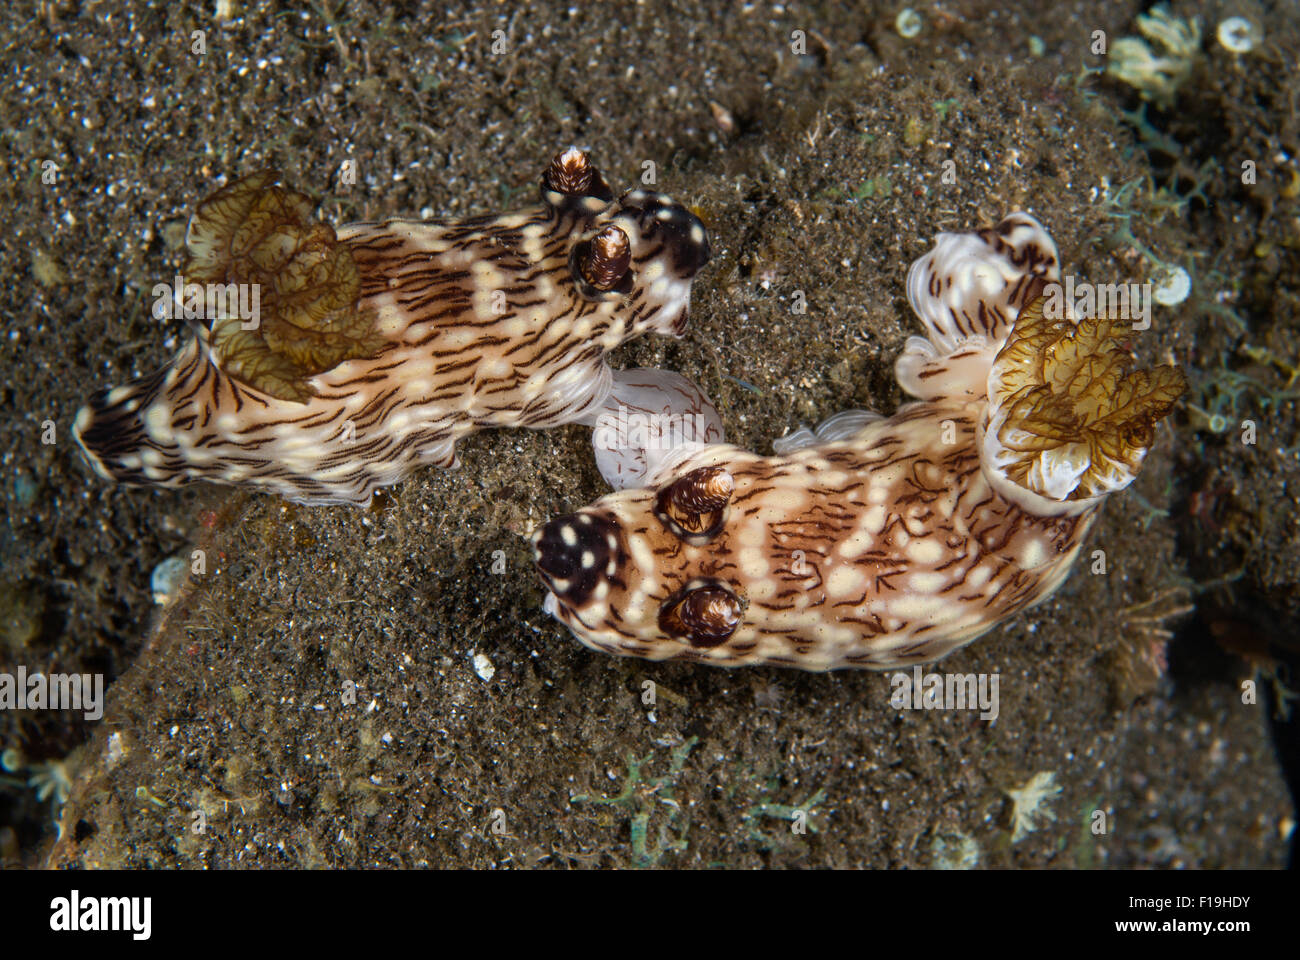 px510249-D. nudibranchs (Jorunna rubescens) mating. Indonesia, tropical Pacific Ocean. Photo Copyright © Brandon Cole. All right Stock Photo